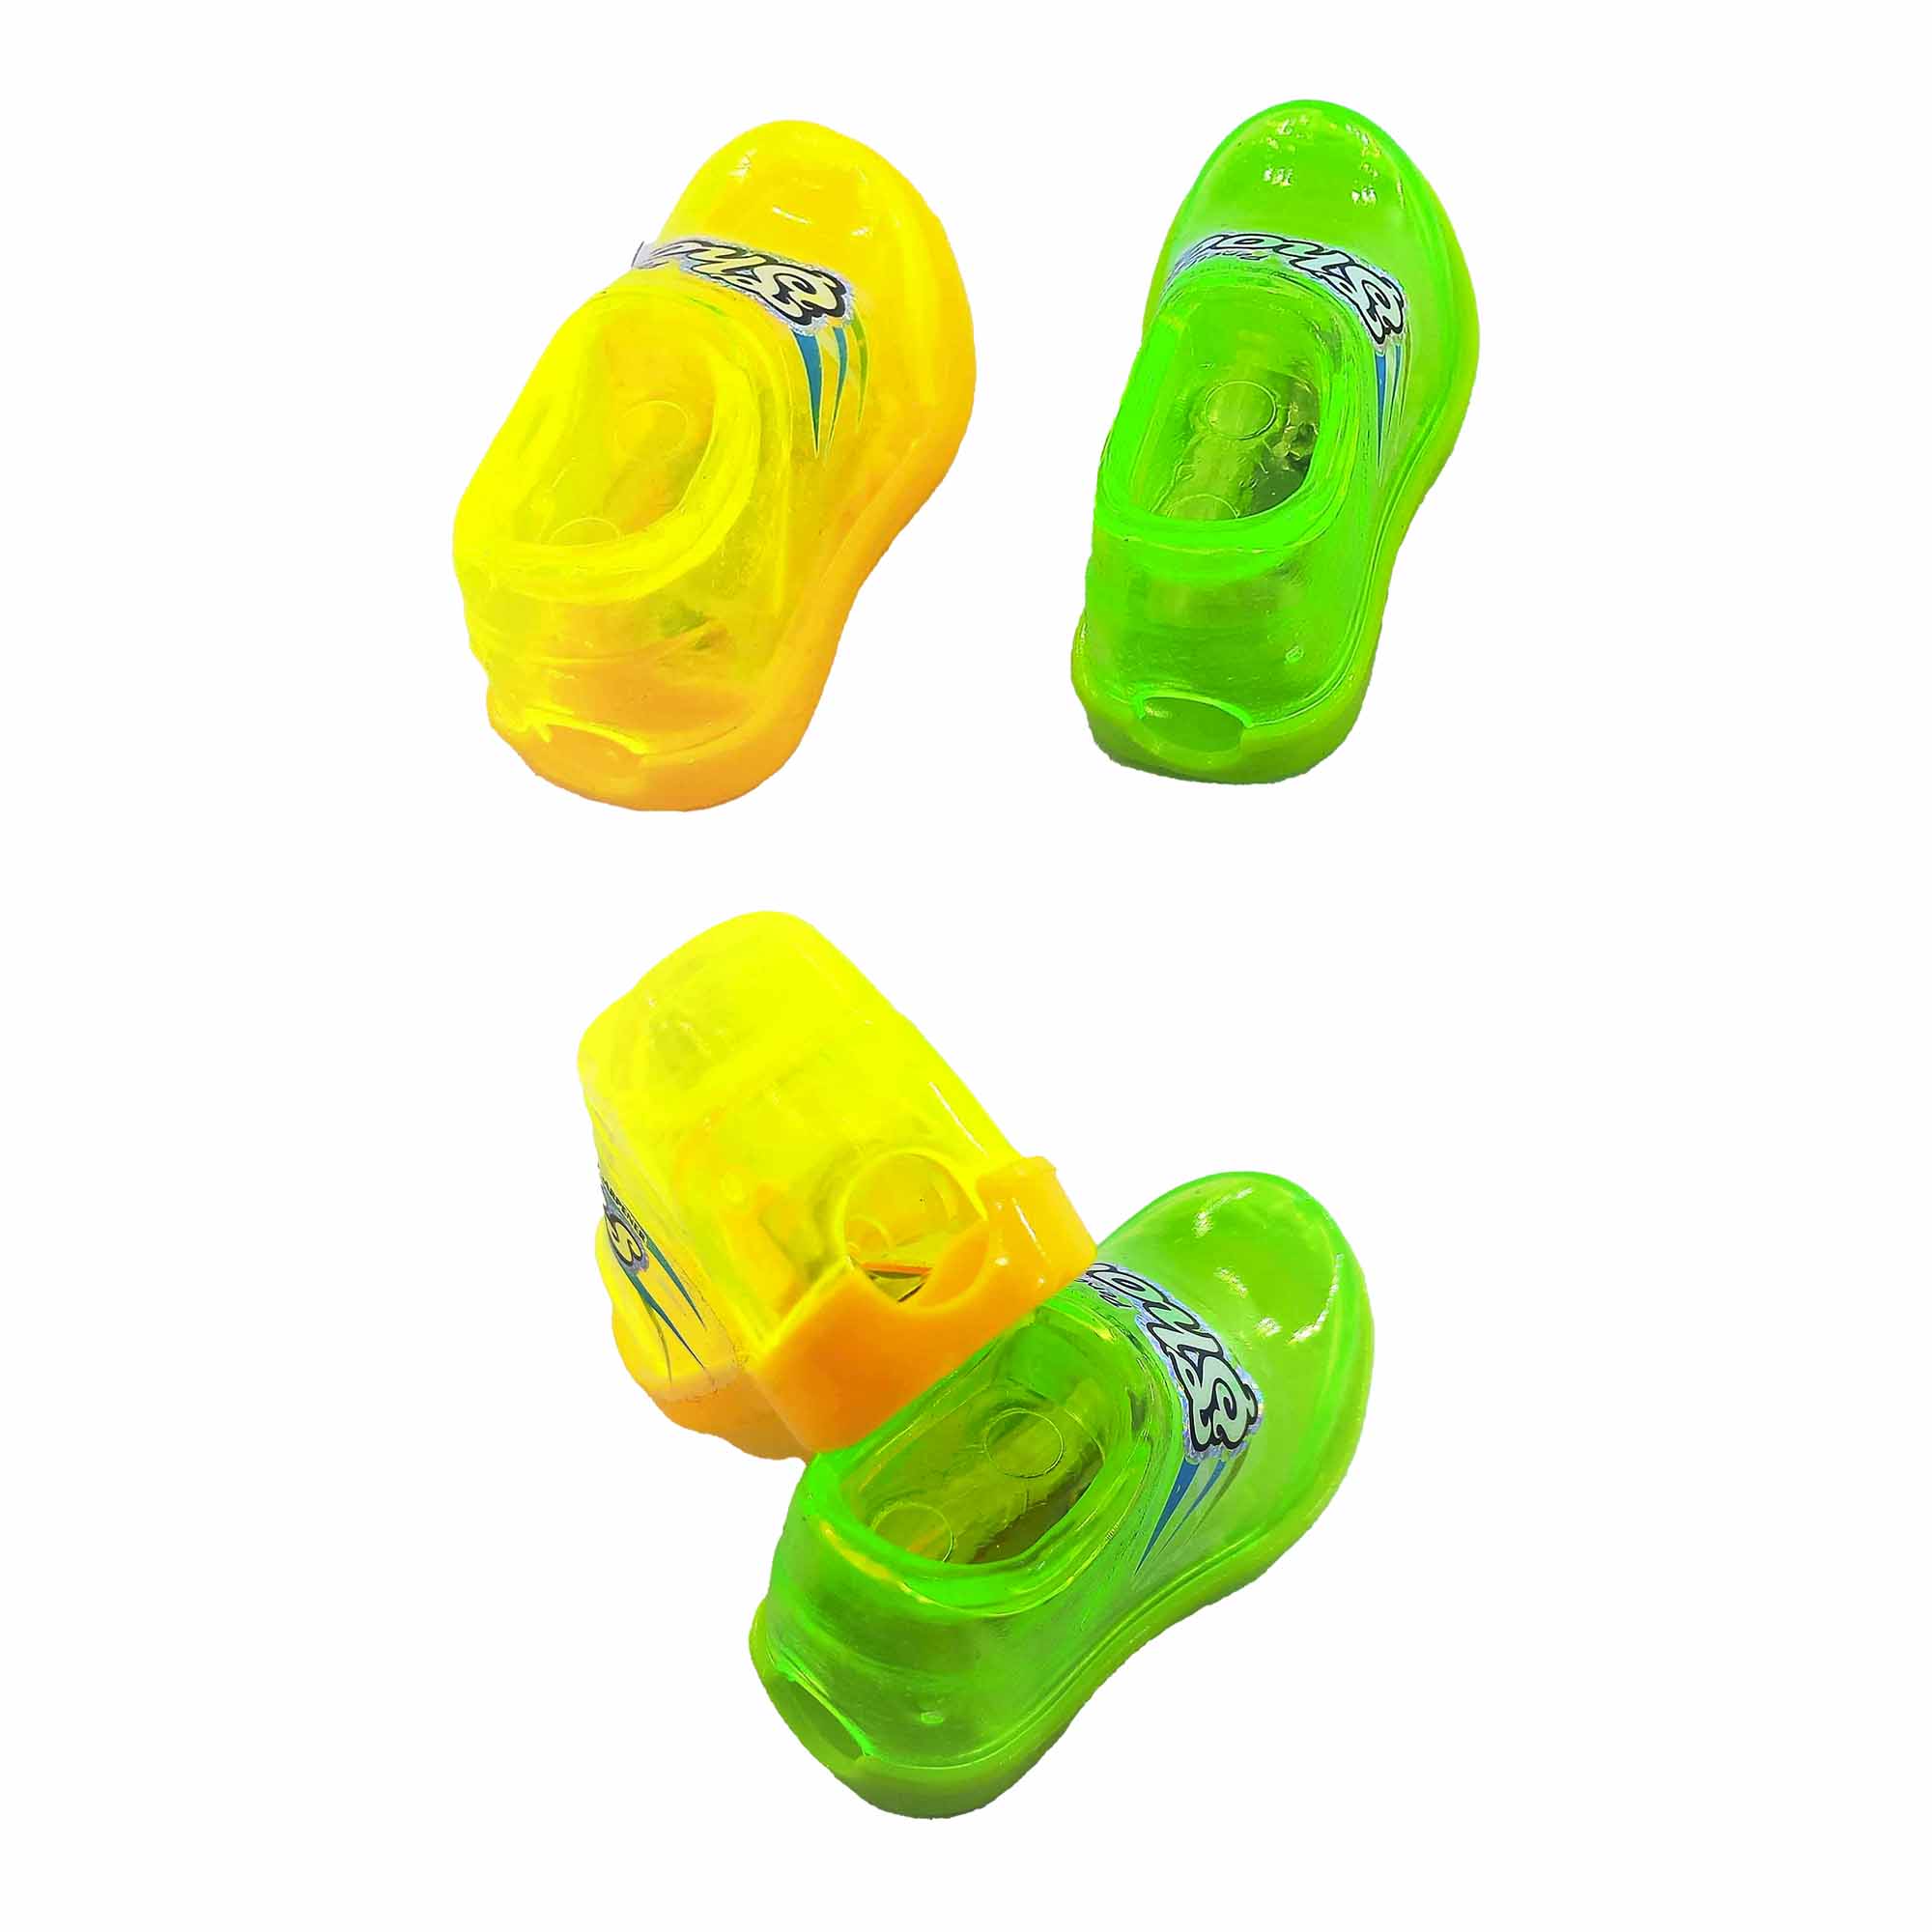 Cute pencil Sharpner 001 Shoe Design Sharpner Multicolor for Boys and Girls, Kids are Mostly Attracted by Seeing These Type of Fancy sharpers Pencil Sharpeners NowBuy.lk 3